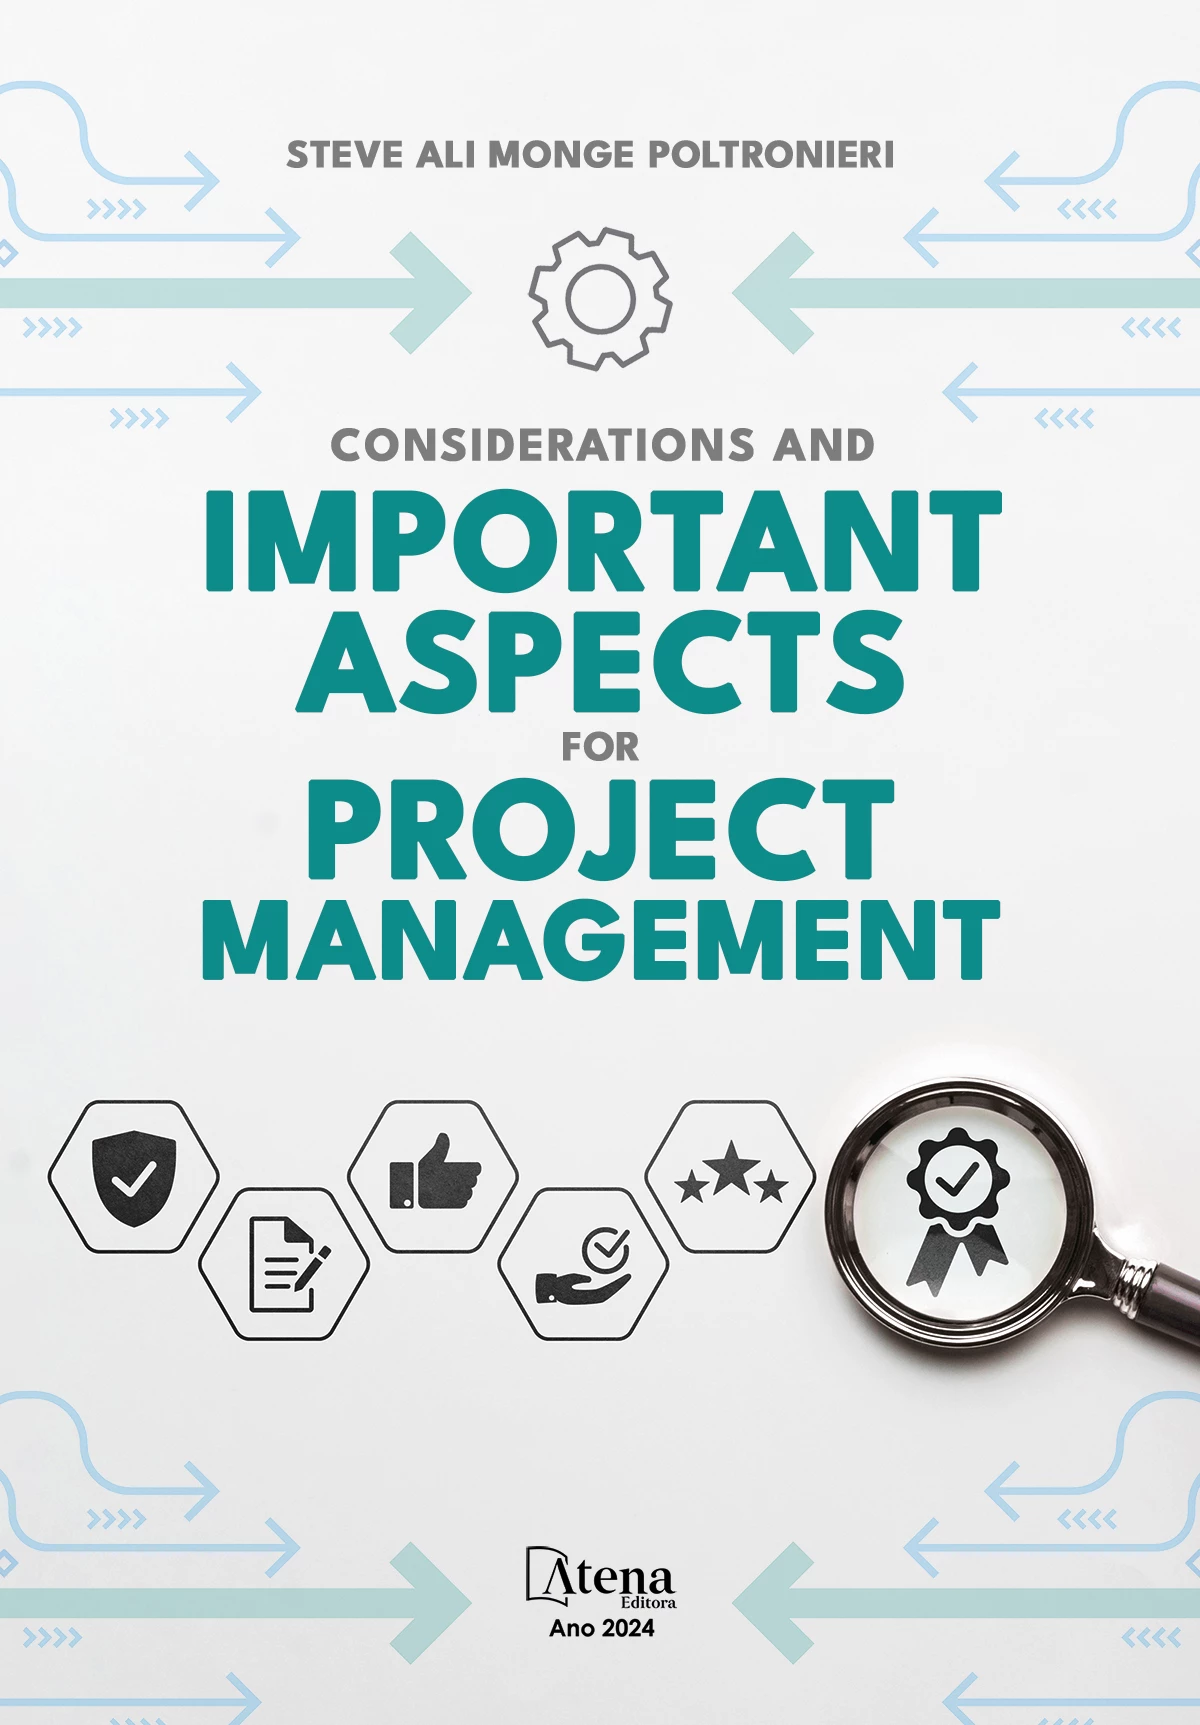 Considerations and important aspects for project management